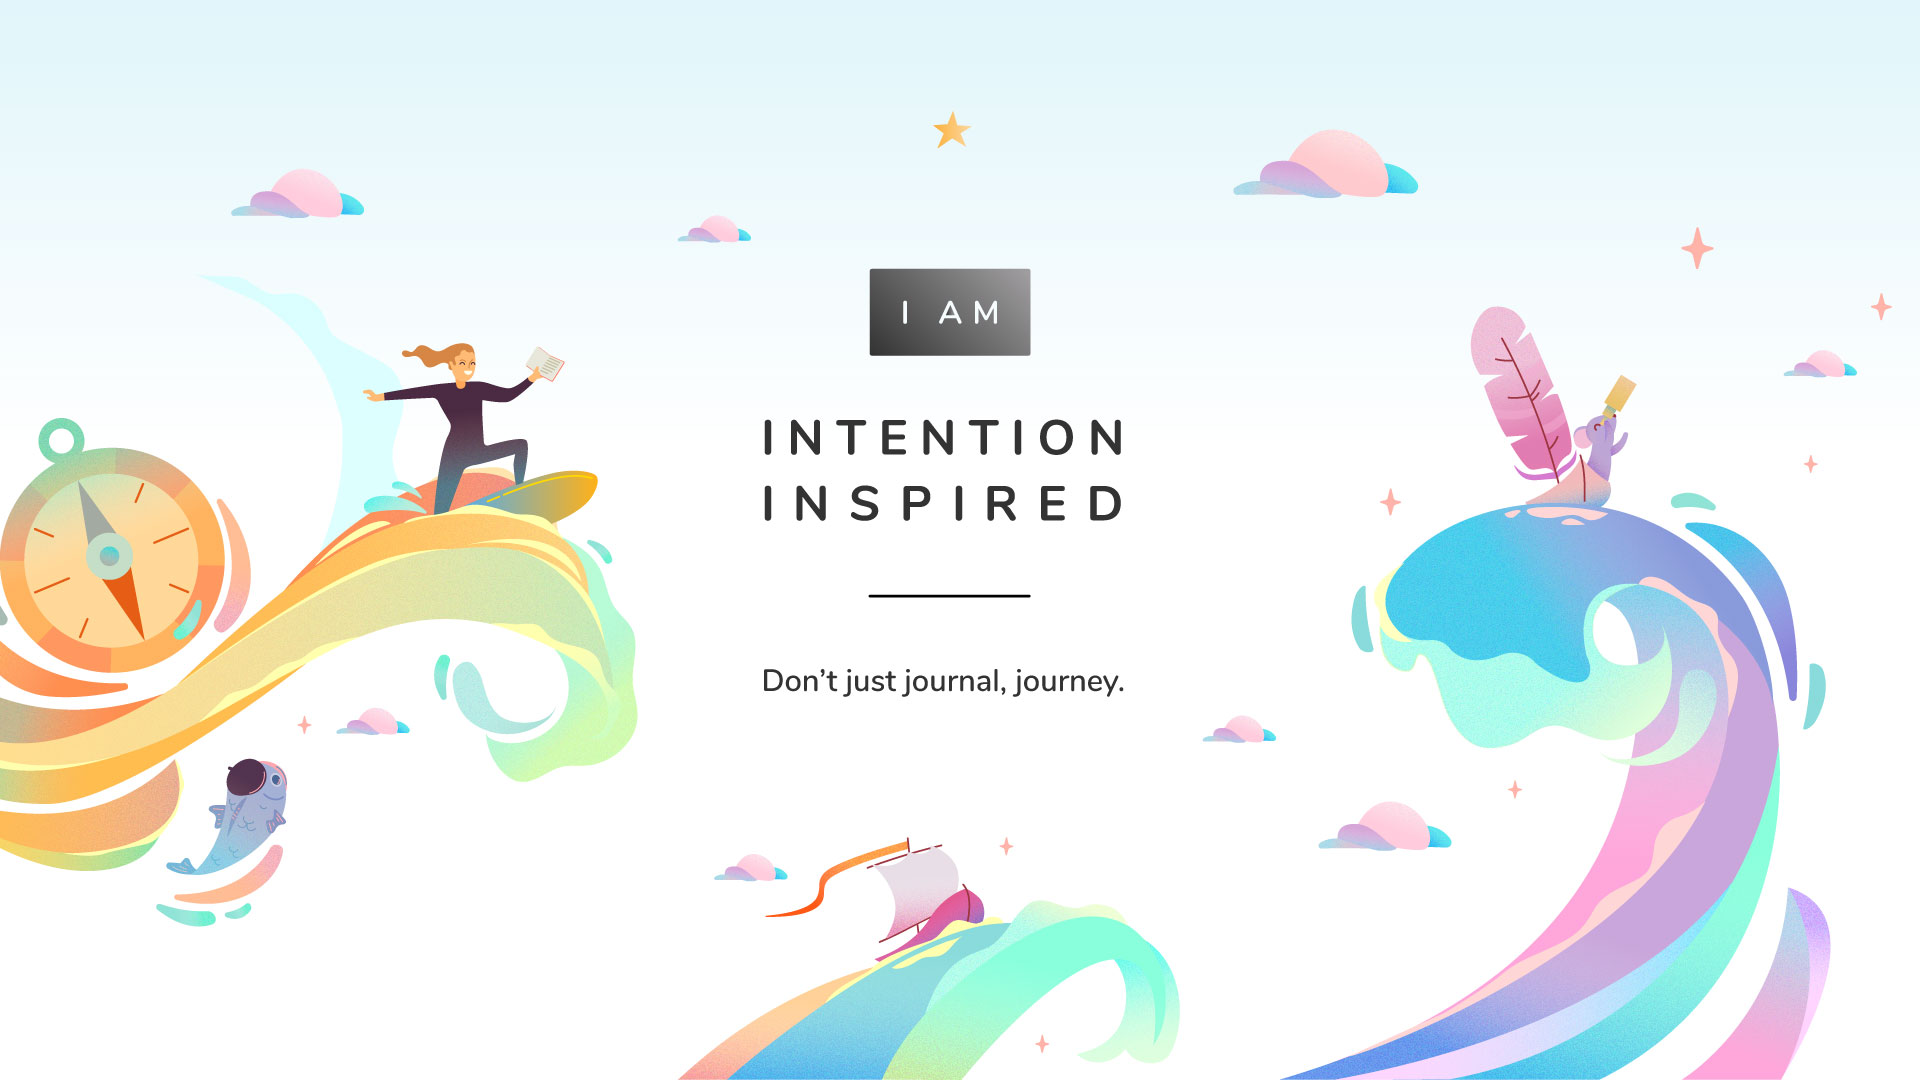 Don't just journal, journey.